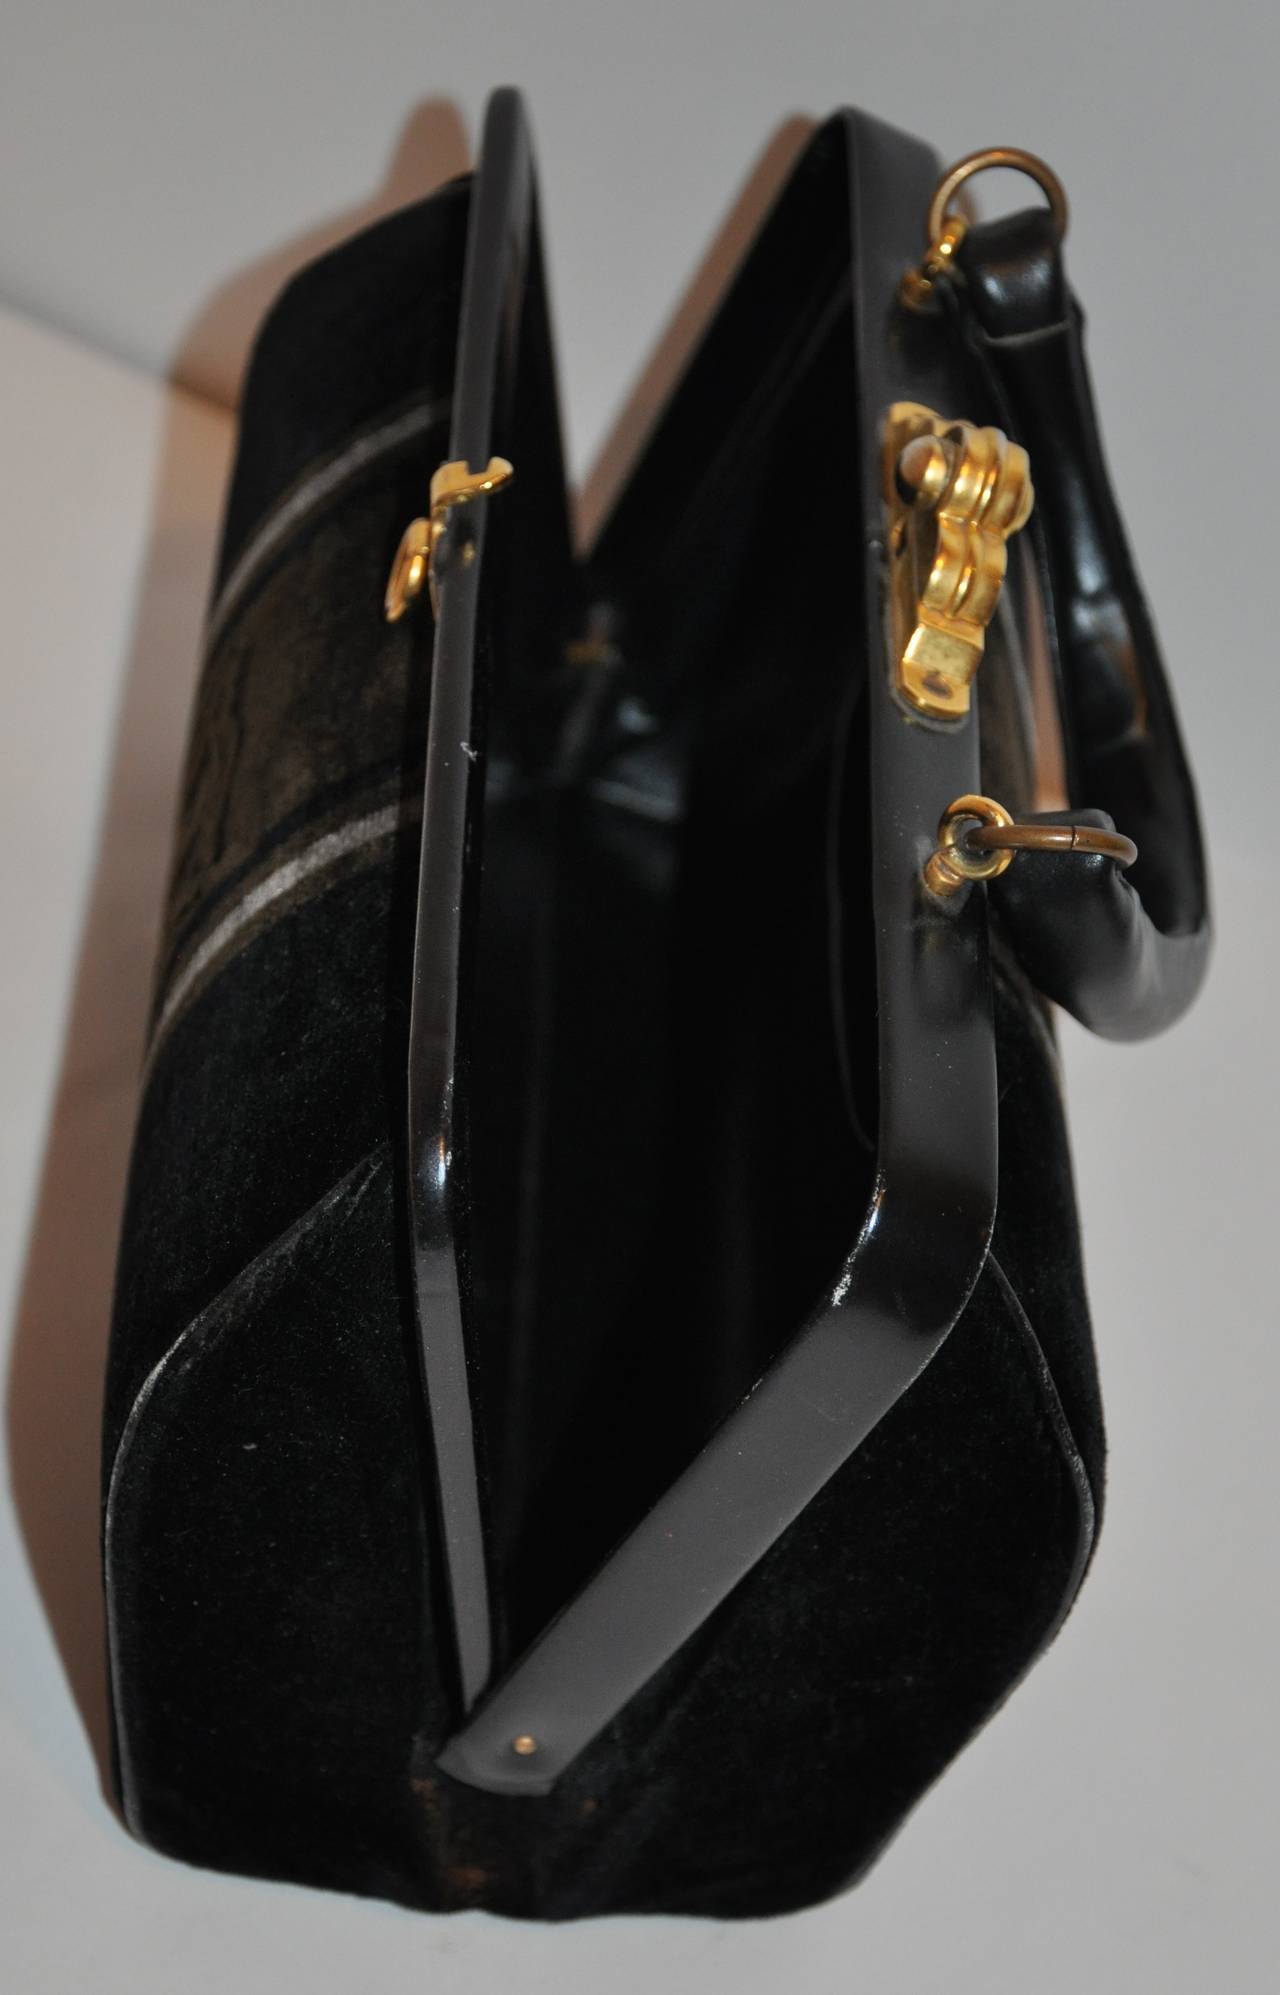 Roberta di Camerino's wonderfully plush cotton black velvet with gray stripe handbag has a heavy hard frame, along with detailed thick gold hardware clasp and opening to this wonderfully elegant and classic work of art in this handbag.
     The